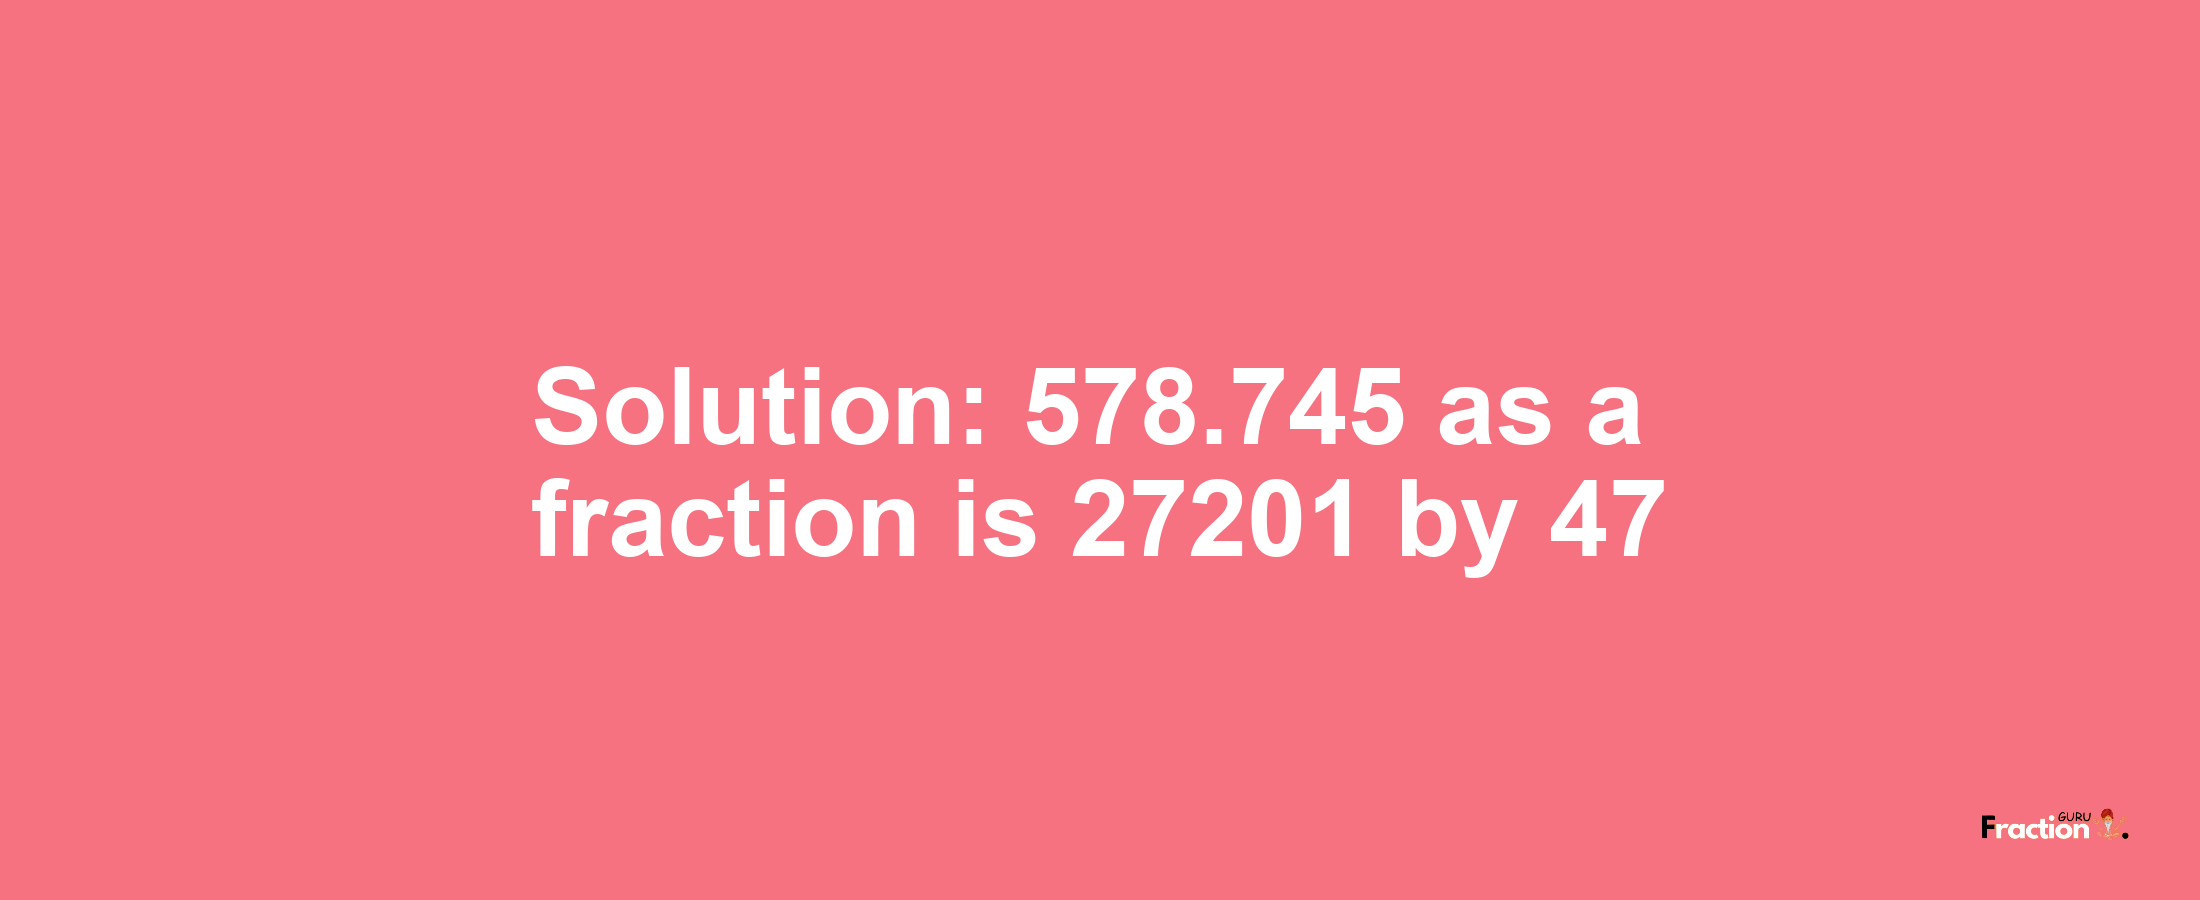 Solution:578.745 as a fraction is 27201/47